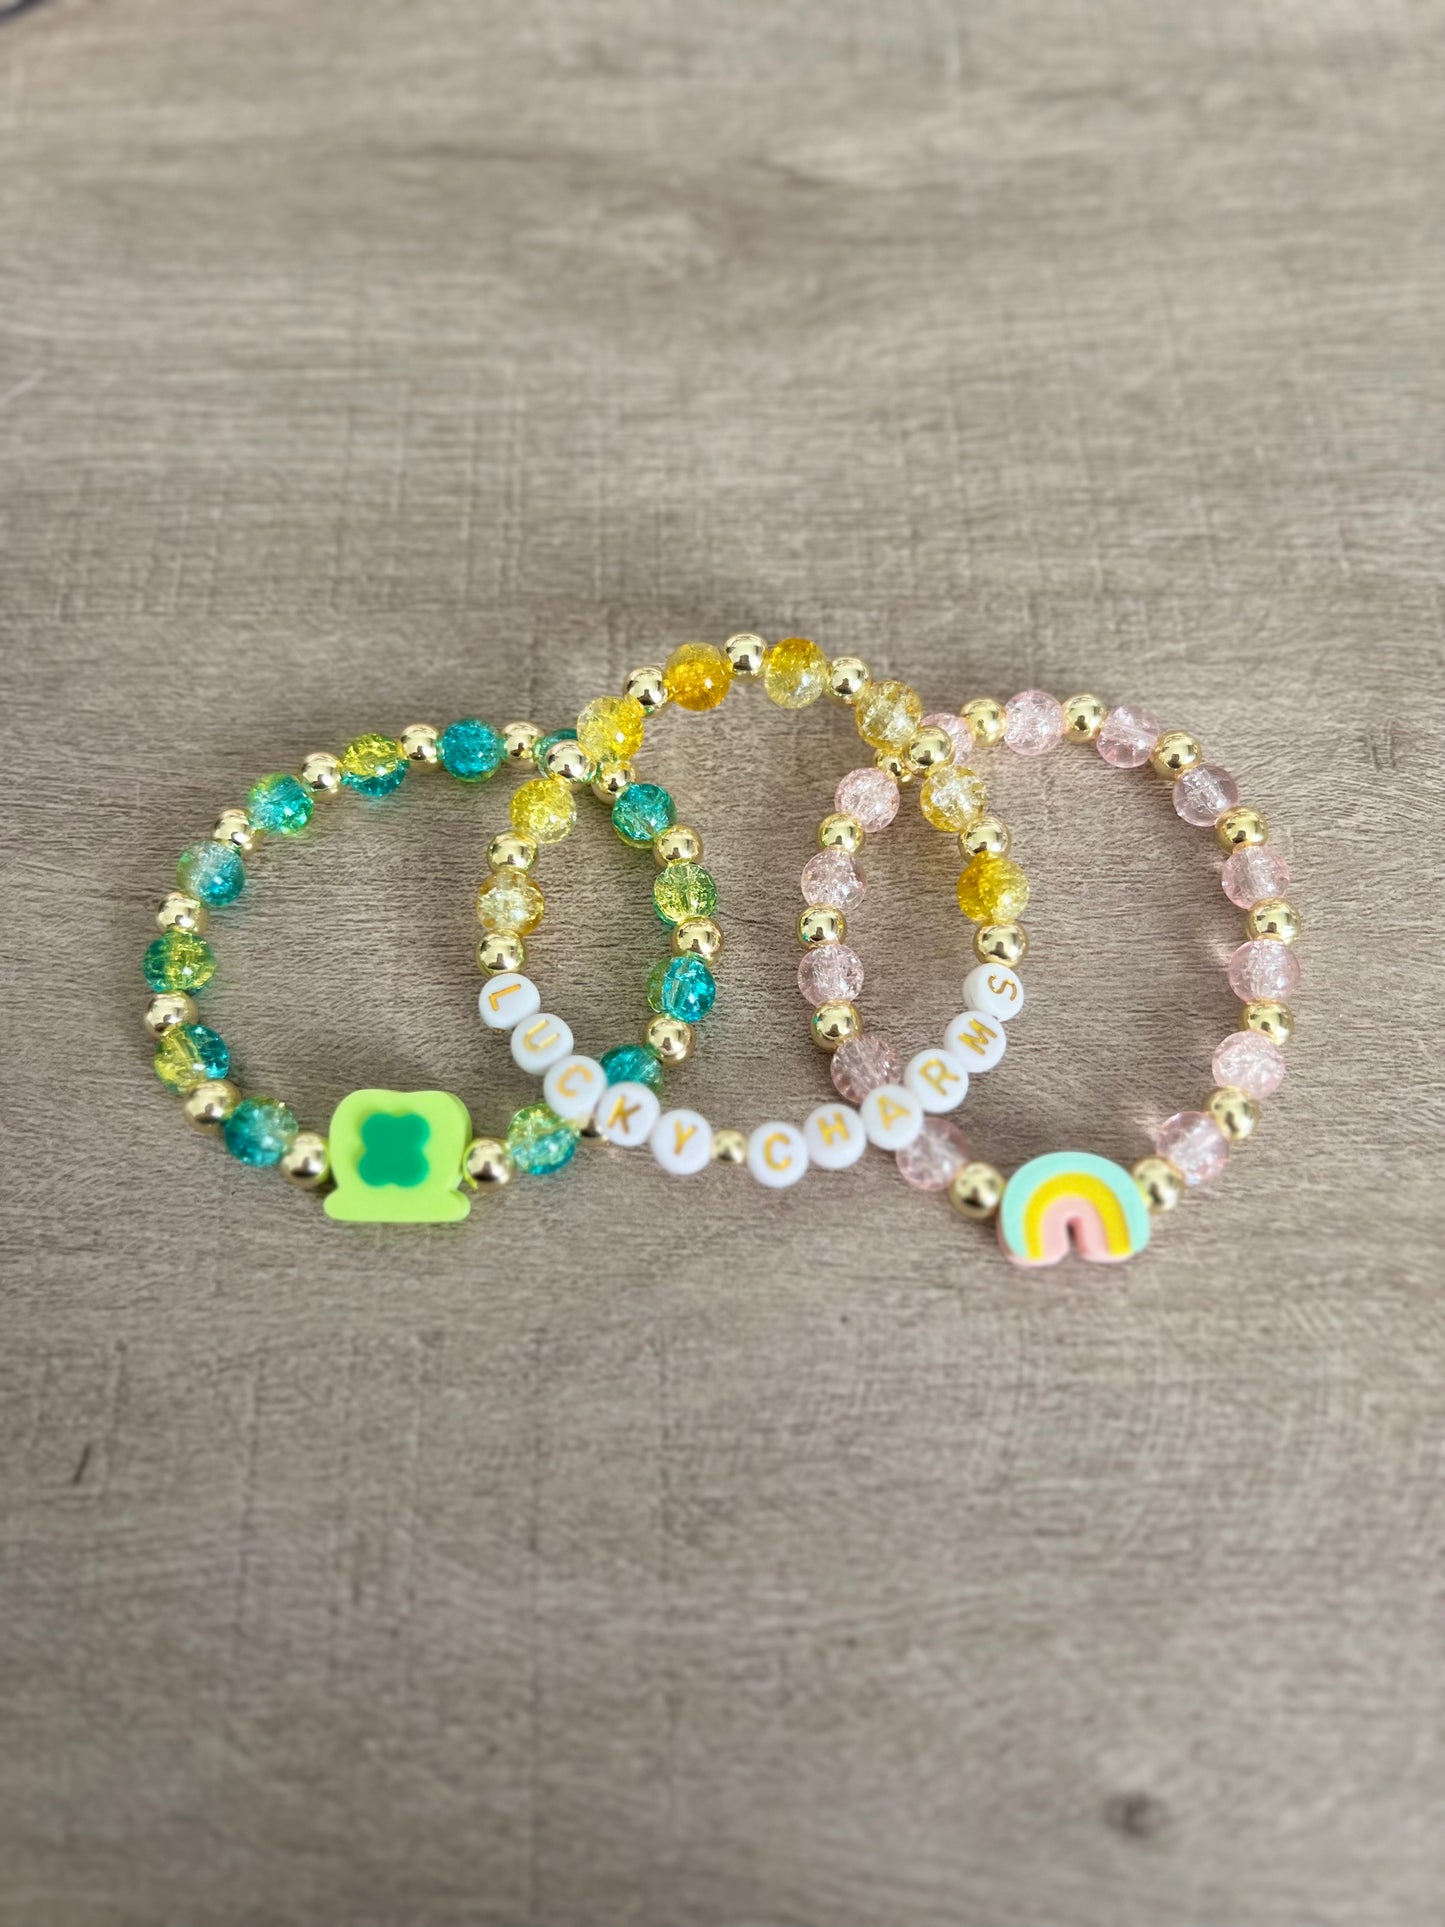 Lucky Charms Set